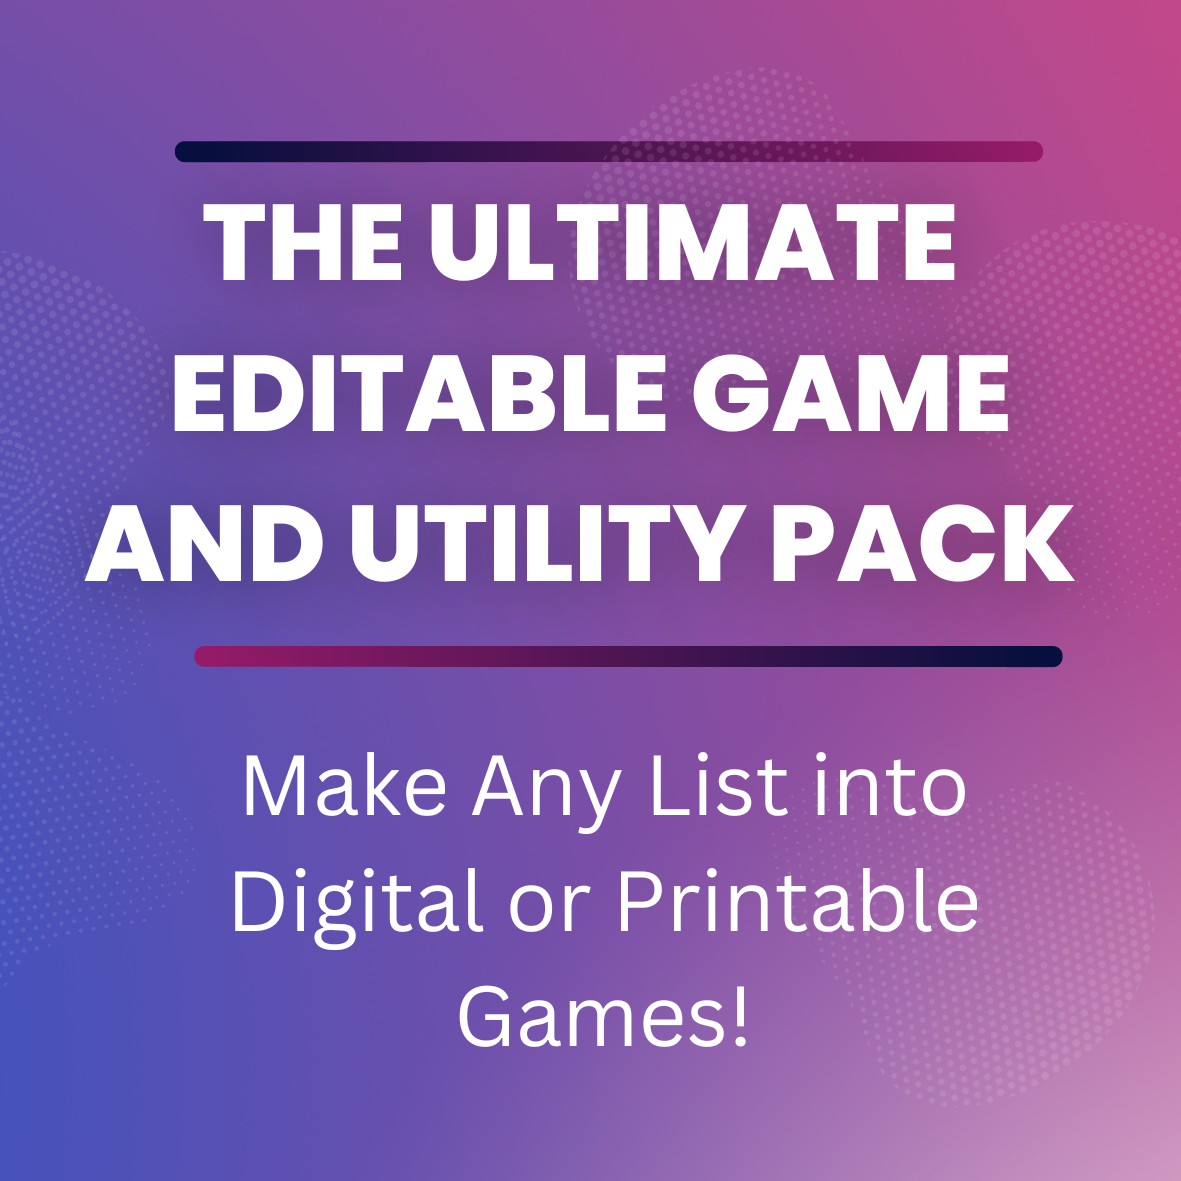 The Ultimate Editable Game and Utilities Pack